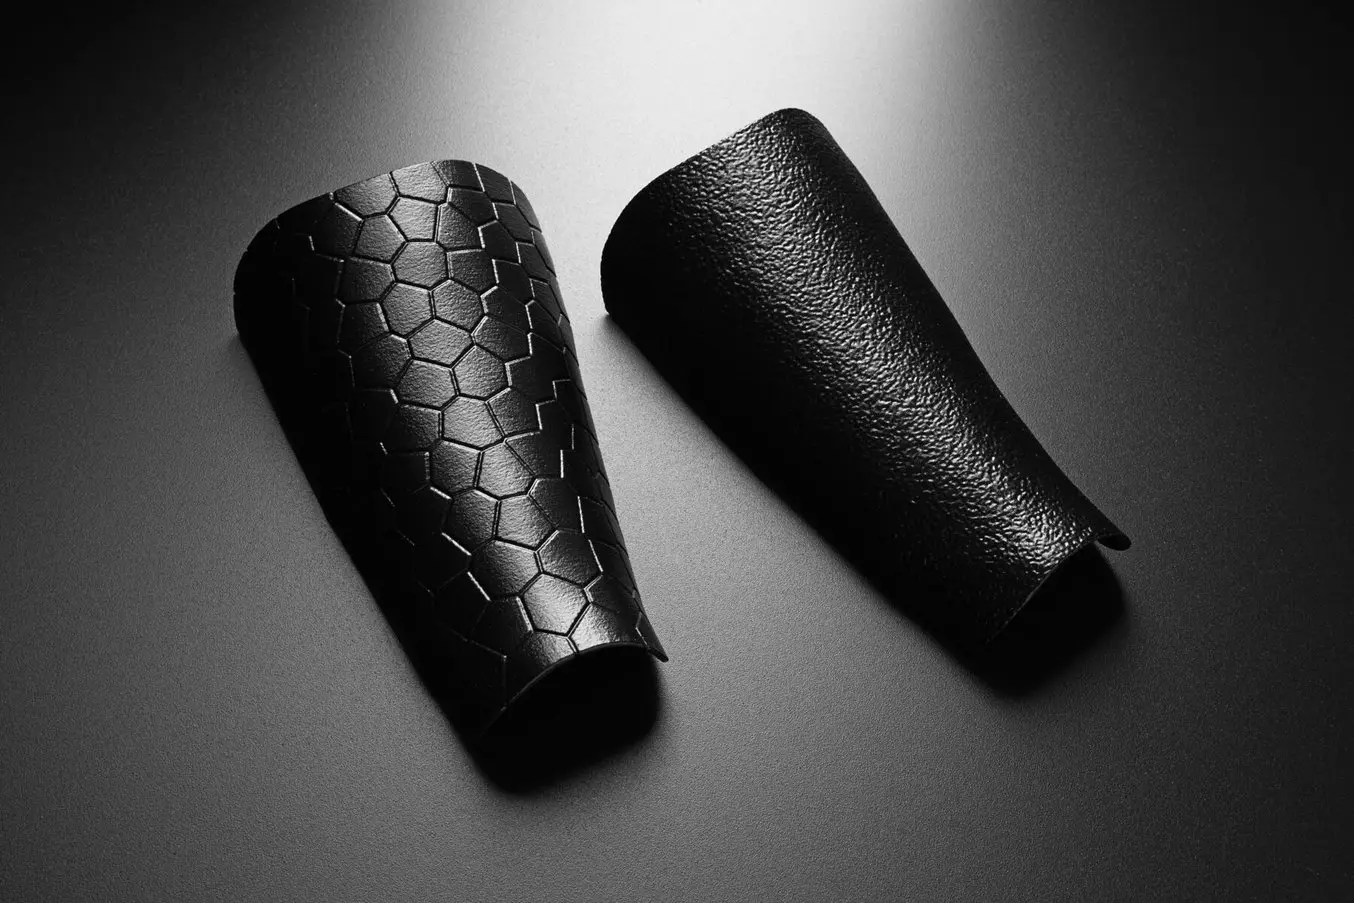 Two black 3D printed parts, one with a hexagonal print and one with light texturing